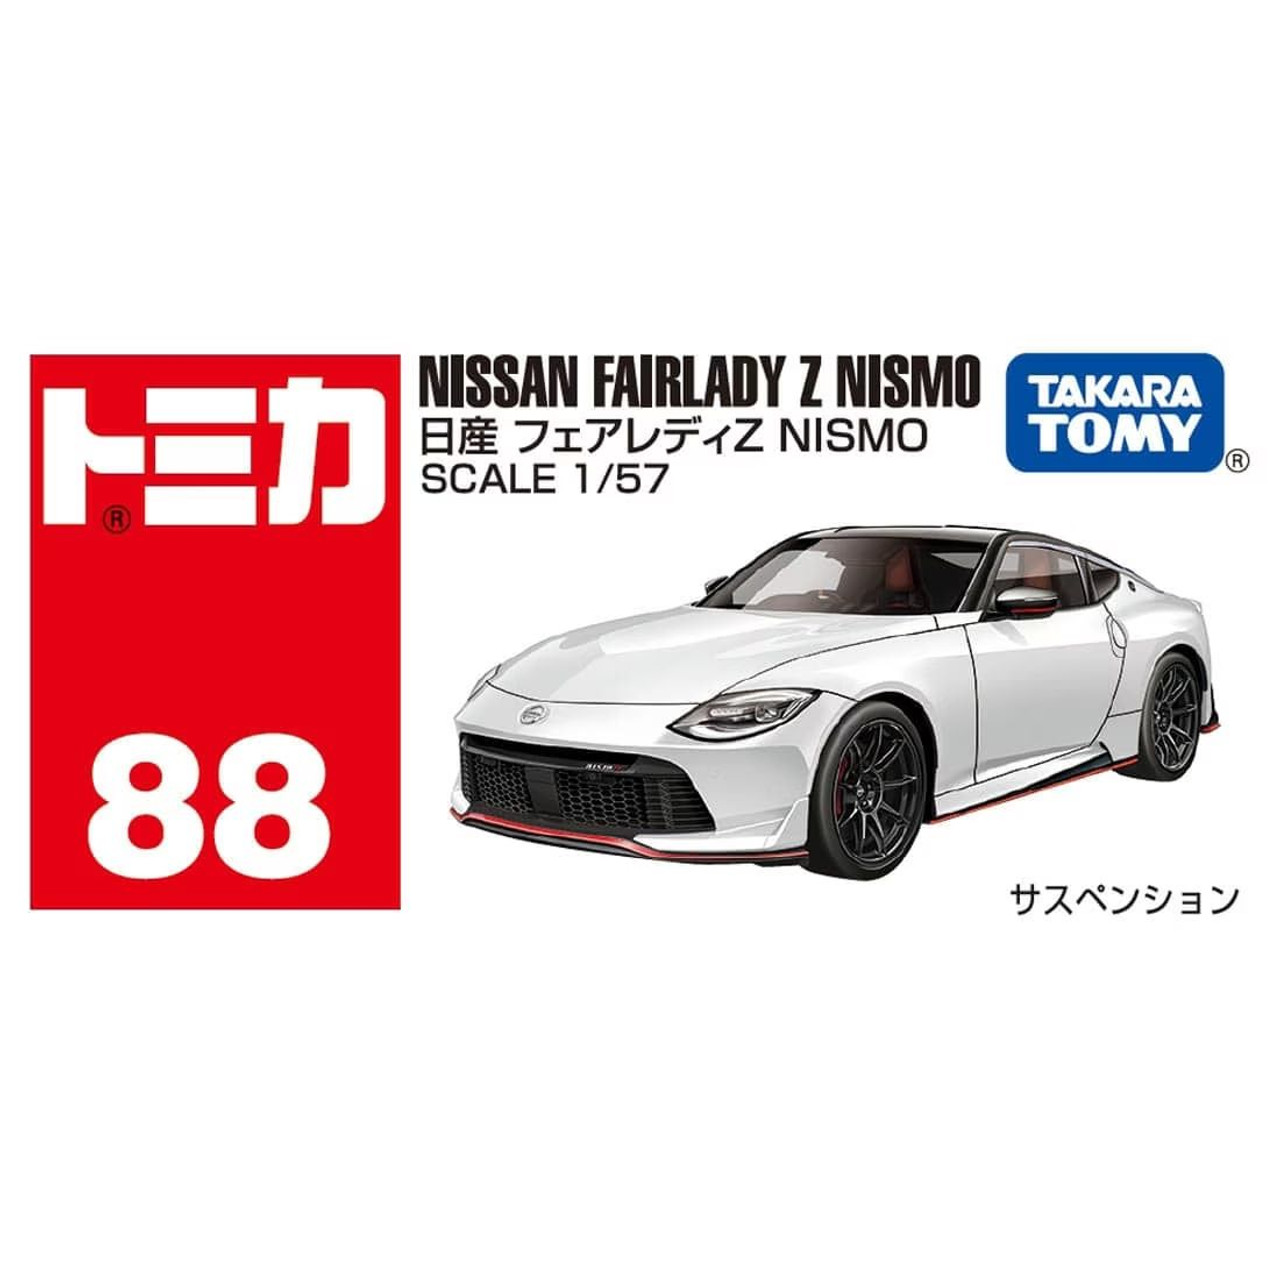 Tomica Nissan Fairlady Z NISMO